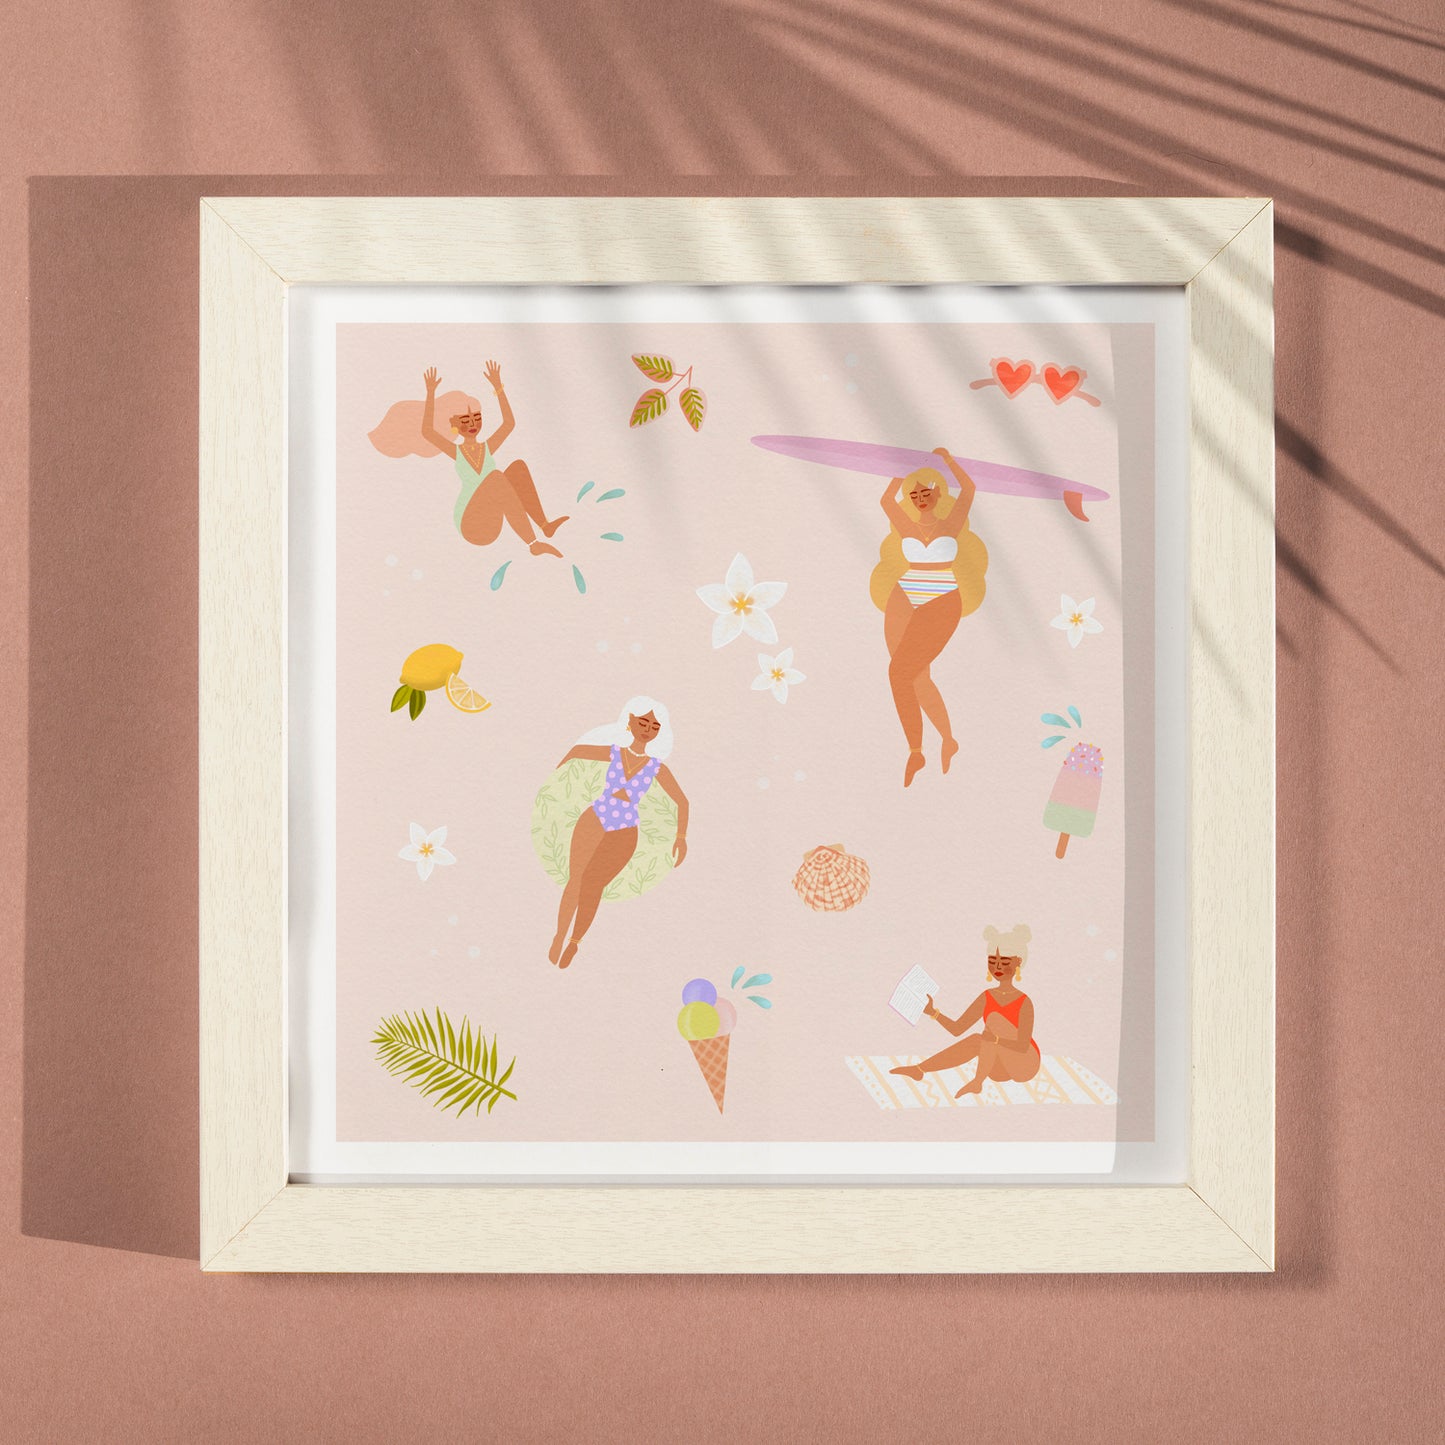 Affiche 20x20 cm • Illustration "Summer Things"